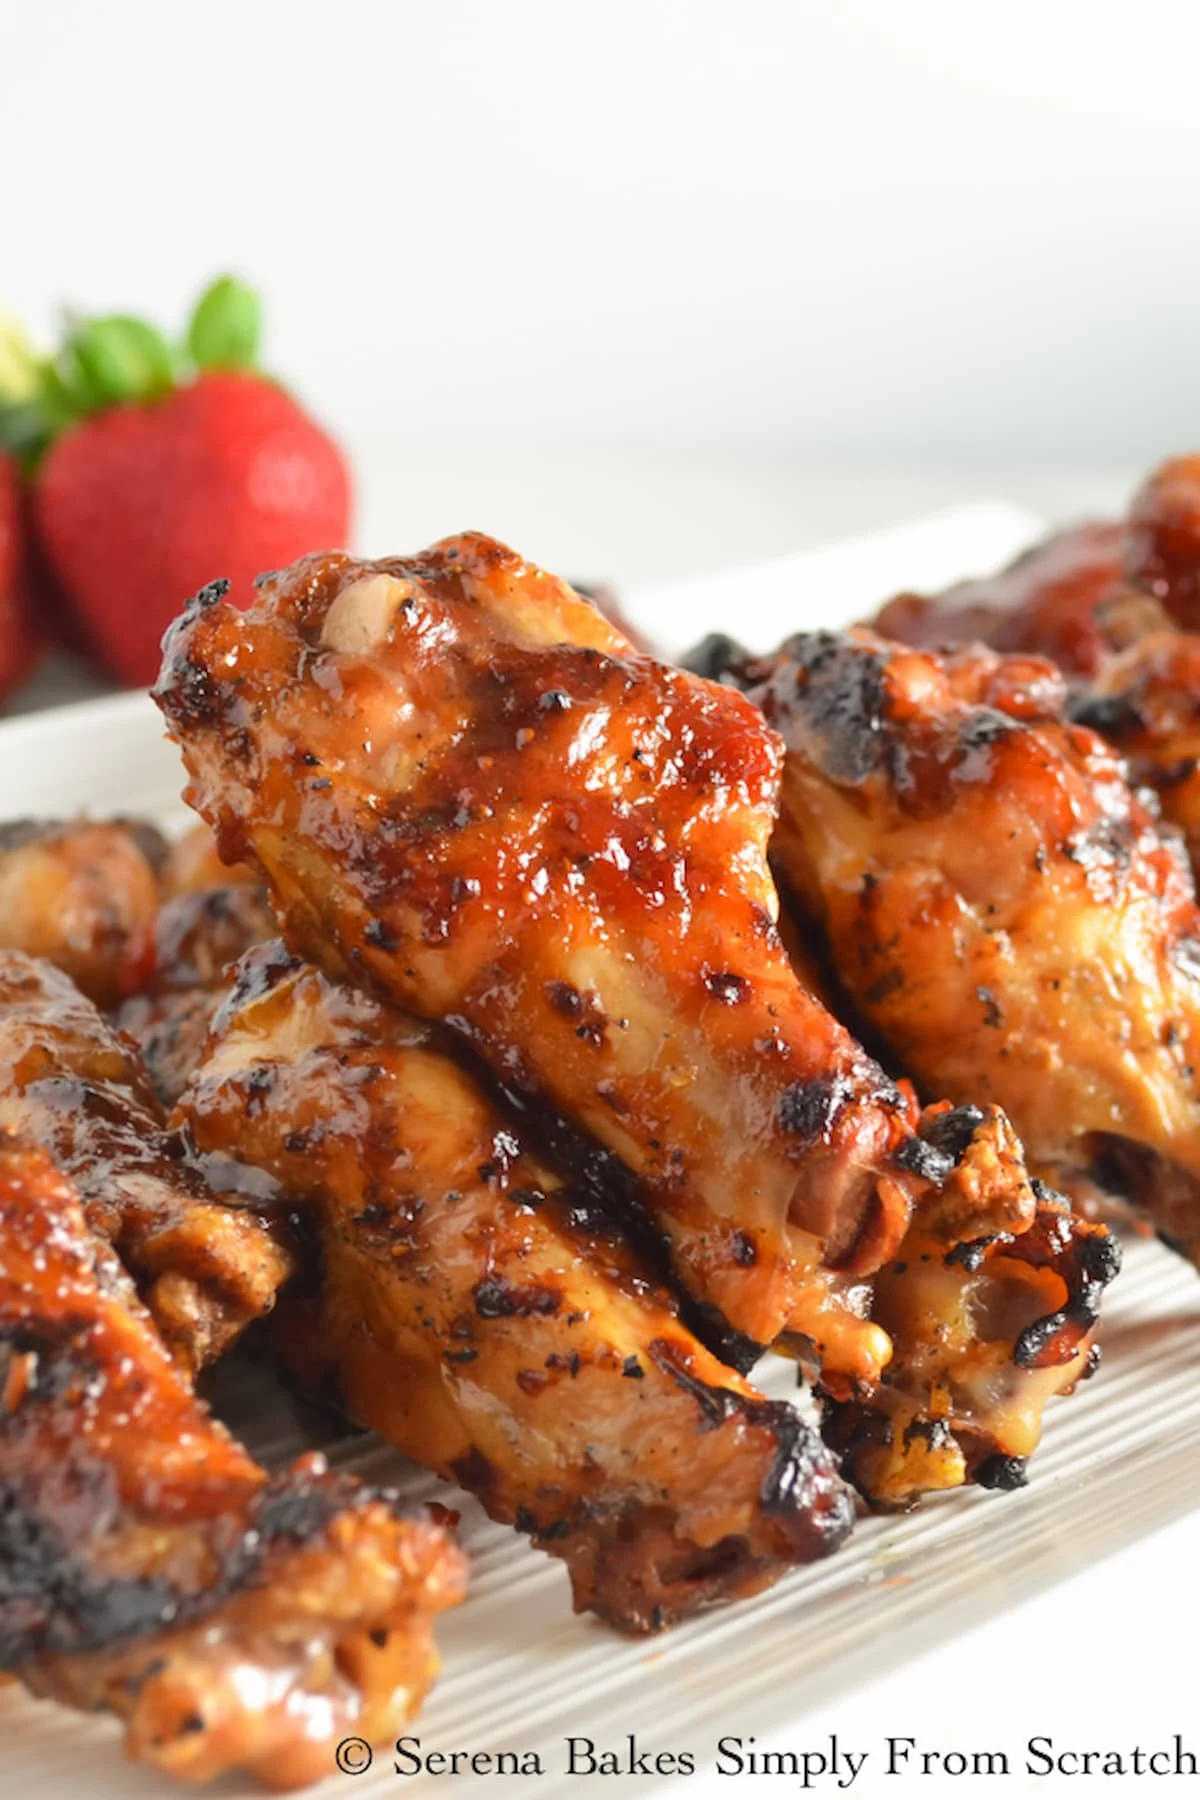 Strawberry Chipotle Hot Wings piled high on a white tray.